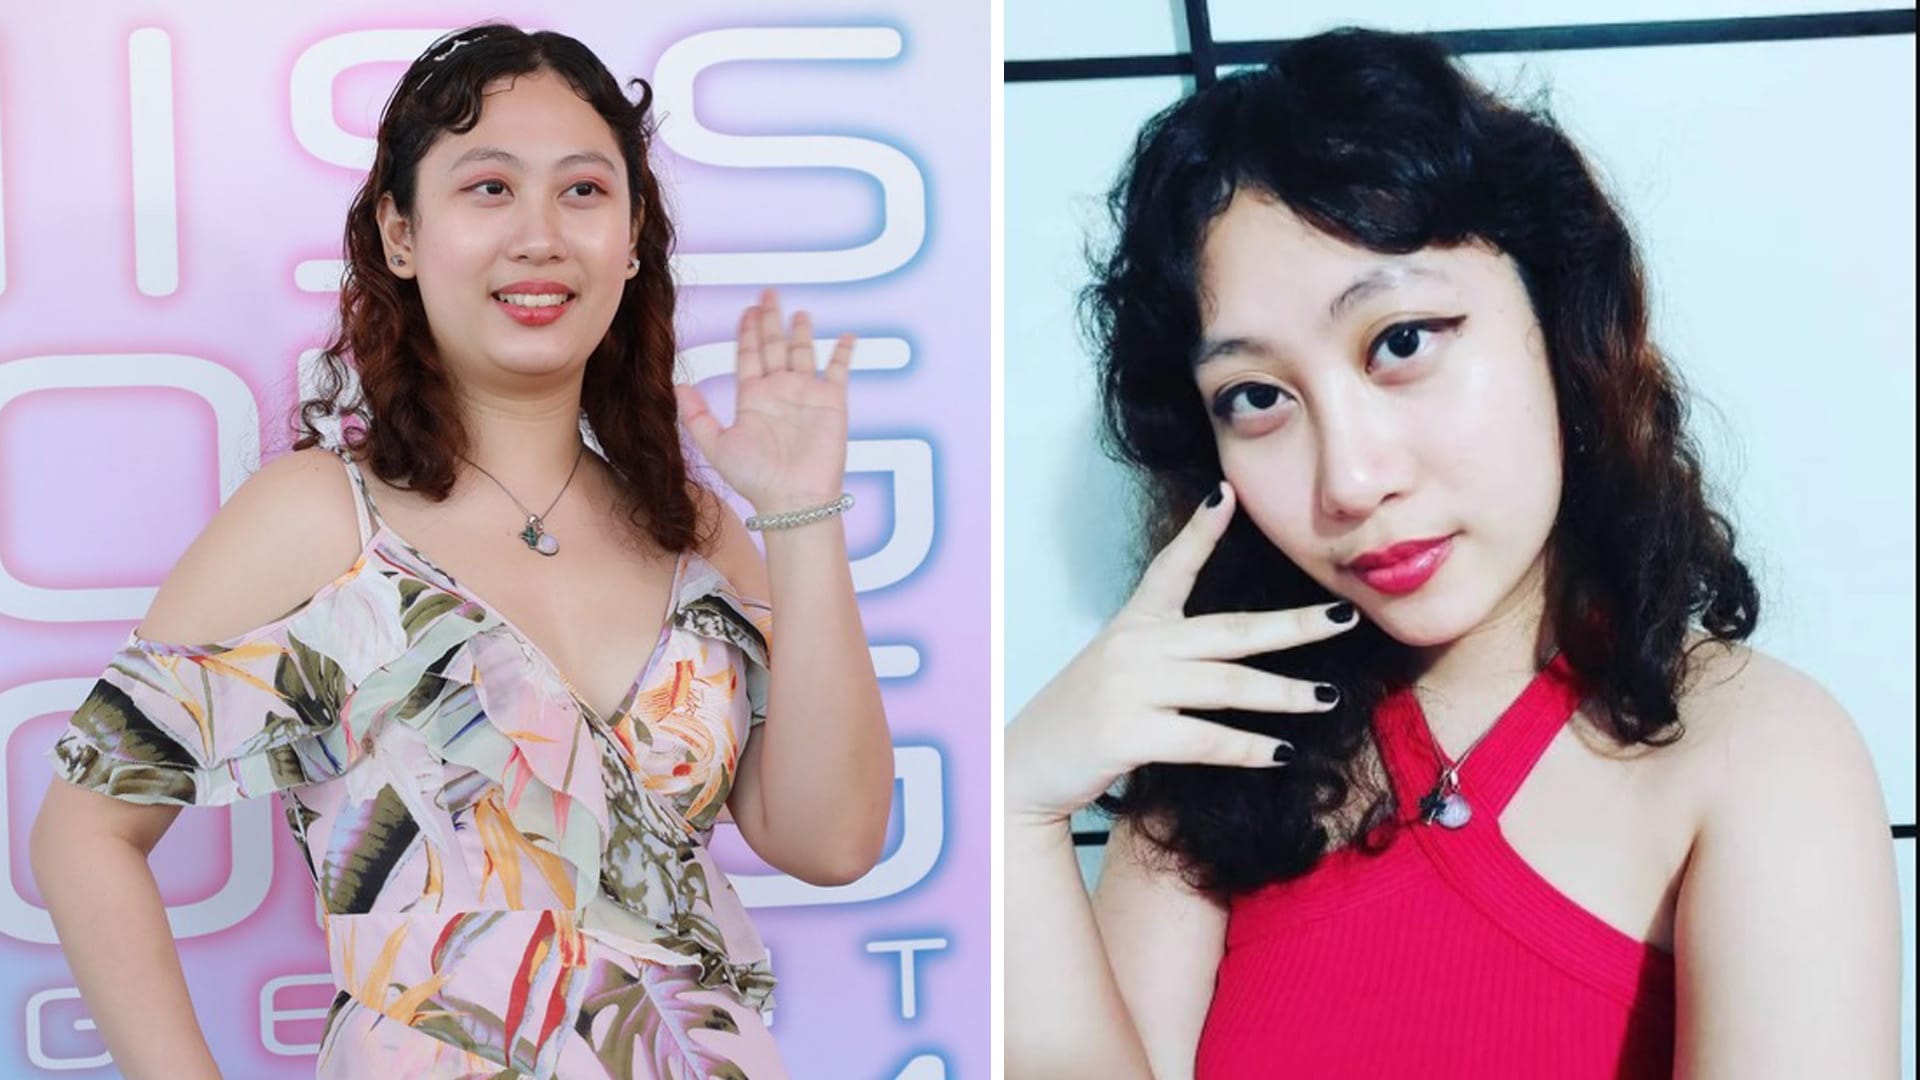 This Failed Miss Hong Kong 2021 Contestant Is So Popular, A Fan Wants To Raise Money So TVB Will Give Her A Spot In The Finals